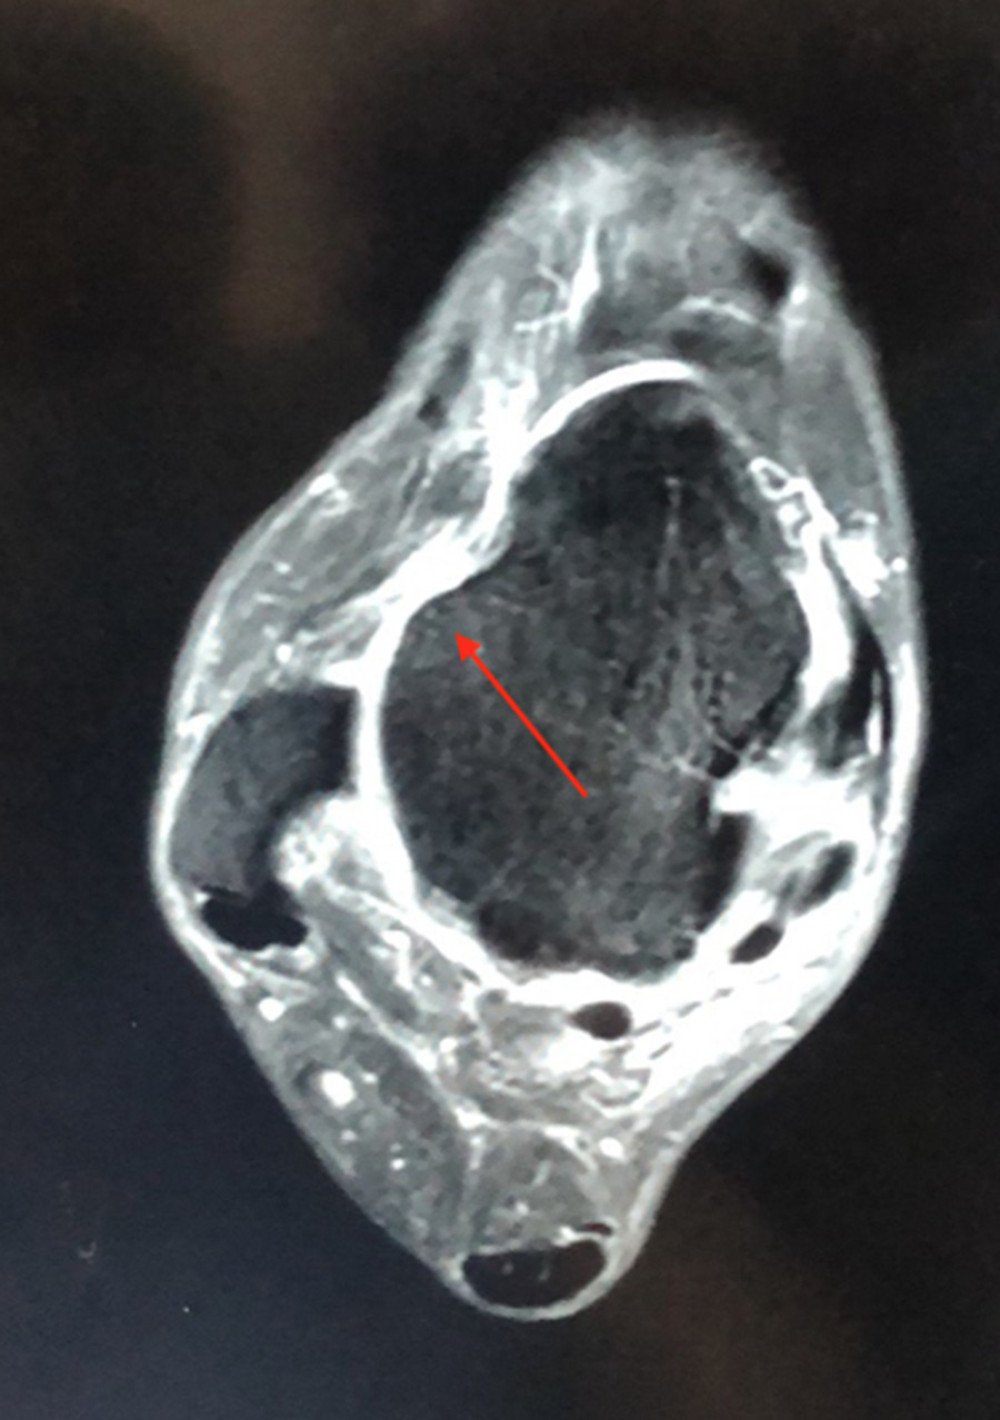 A 2-dimensional MRI image of a 45-year-old patient with anterior talofibular ligament (ATFL) injury, revealing a complete ATFL tear (arrow).